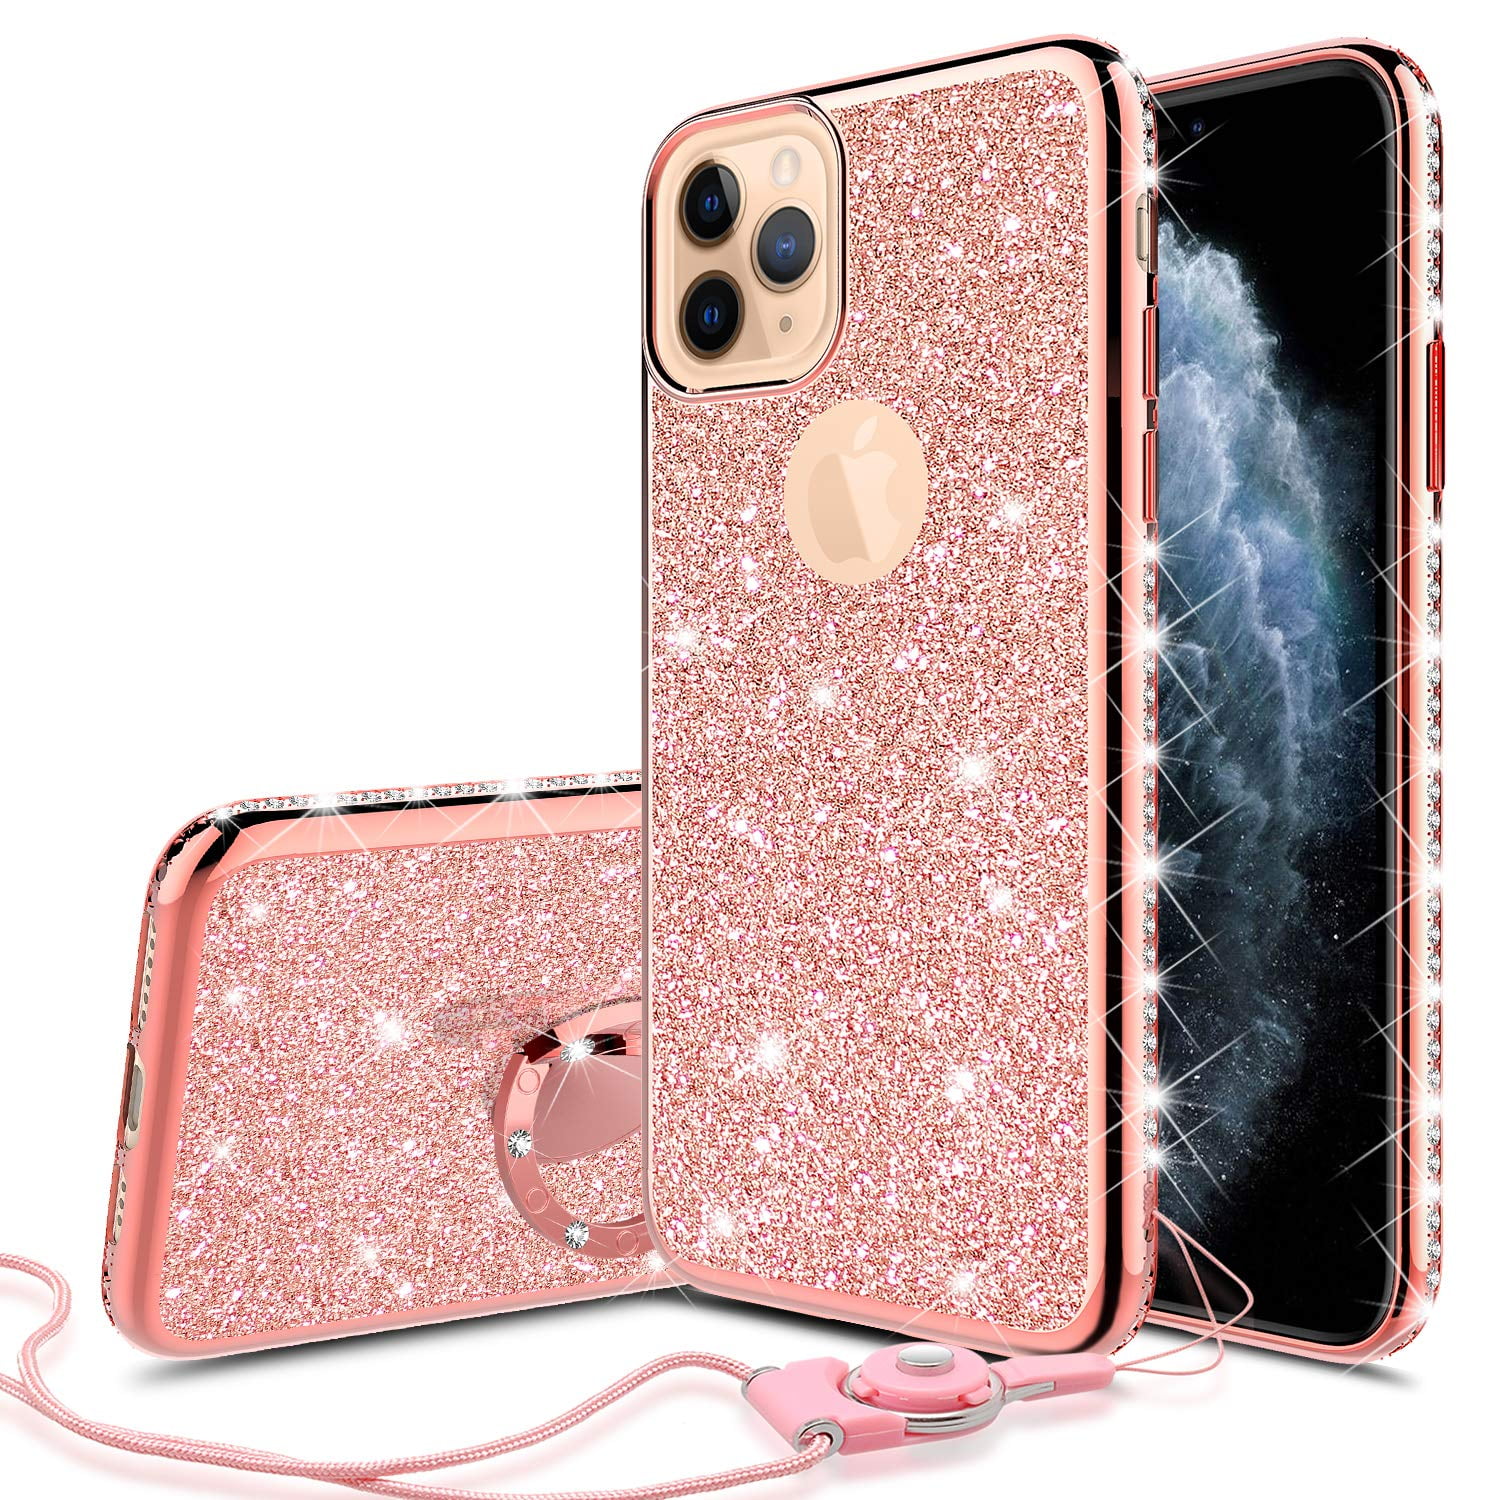 Apple Iphone 11 Pro Max Case For Girl Women Glitter Cute Girly Ring Kickstand Diamond Rhinestone Bumper Pink Clear Shock Proof Protective Phone Case Iphone 11 Pro Max 6 5inch Rose Gold Walmart Com